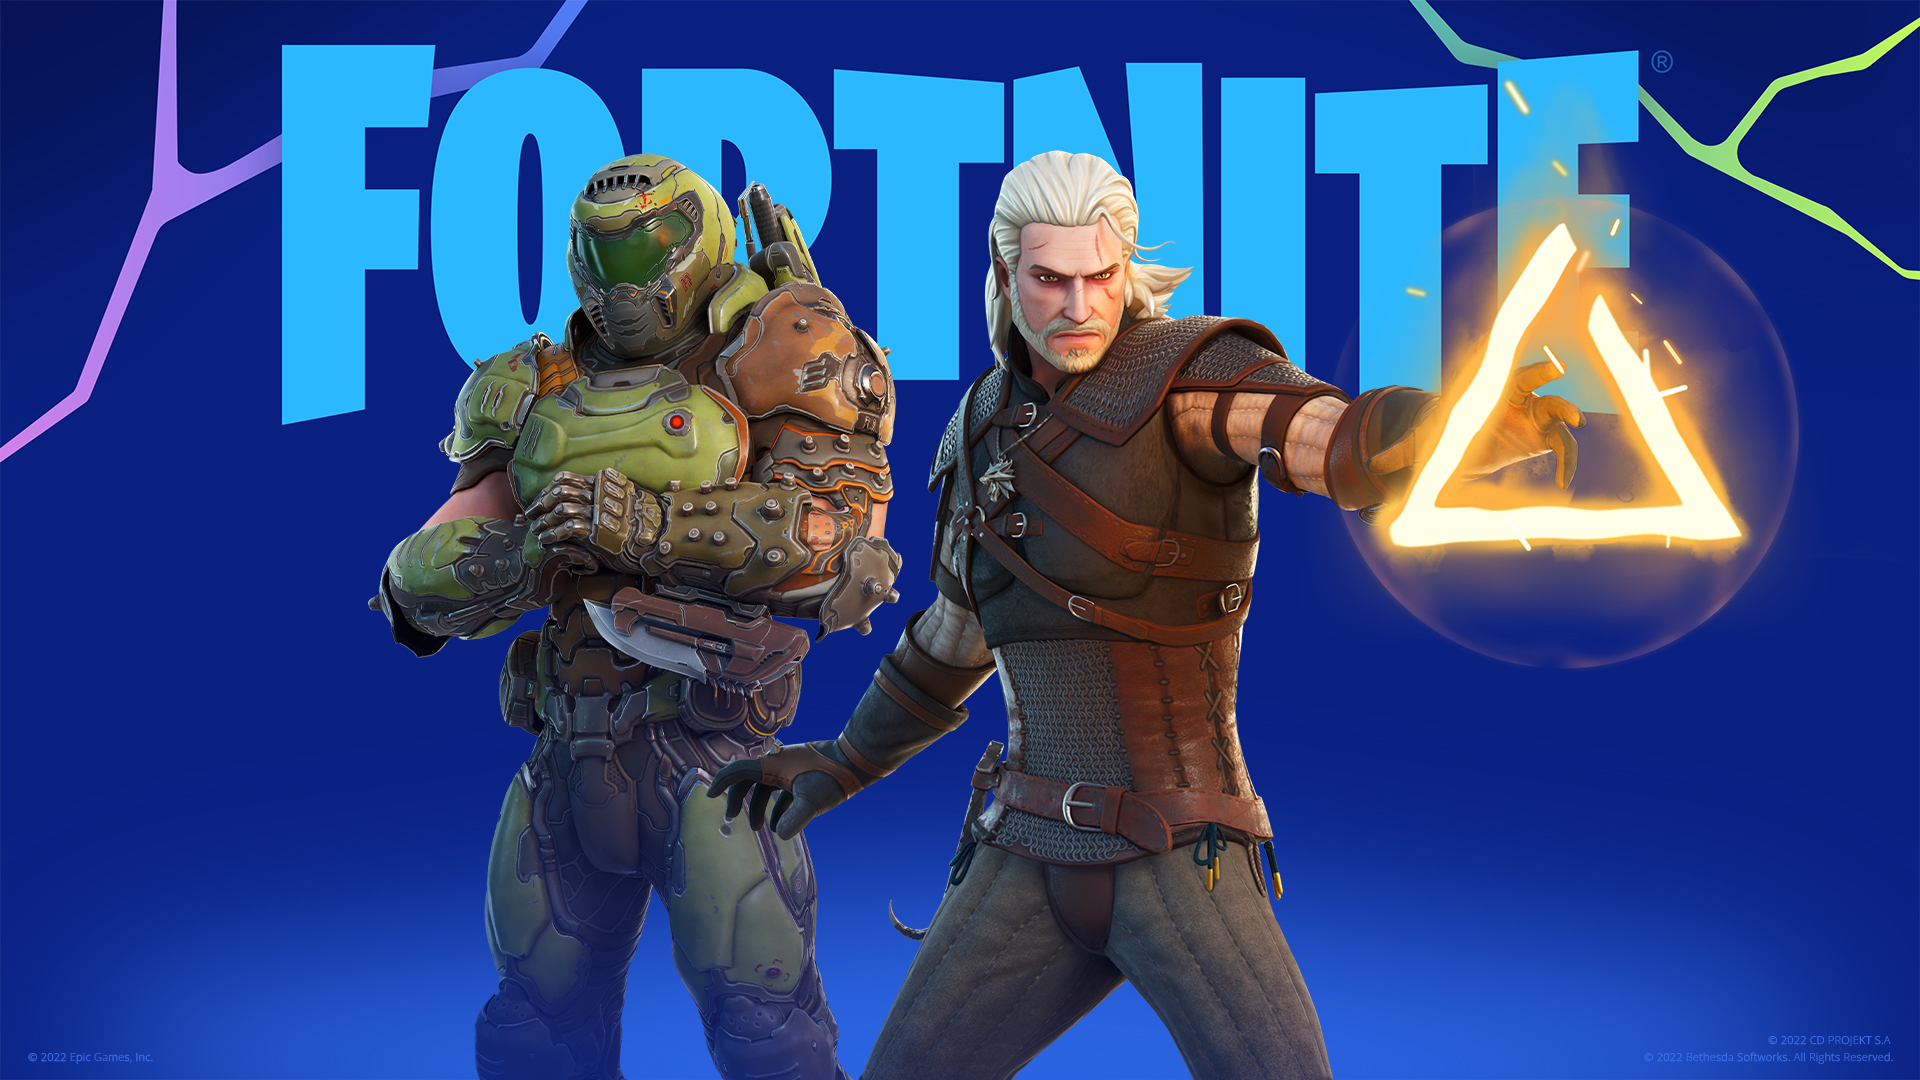 How to get The Witcher Geralt of Rivia Fortnite skin